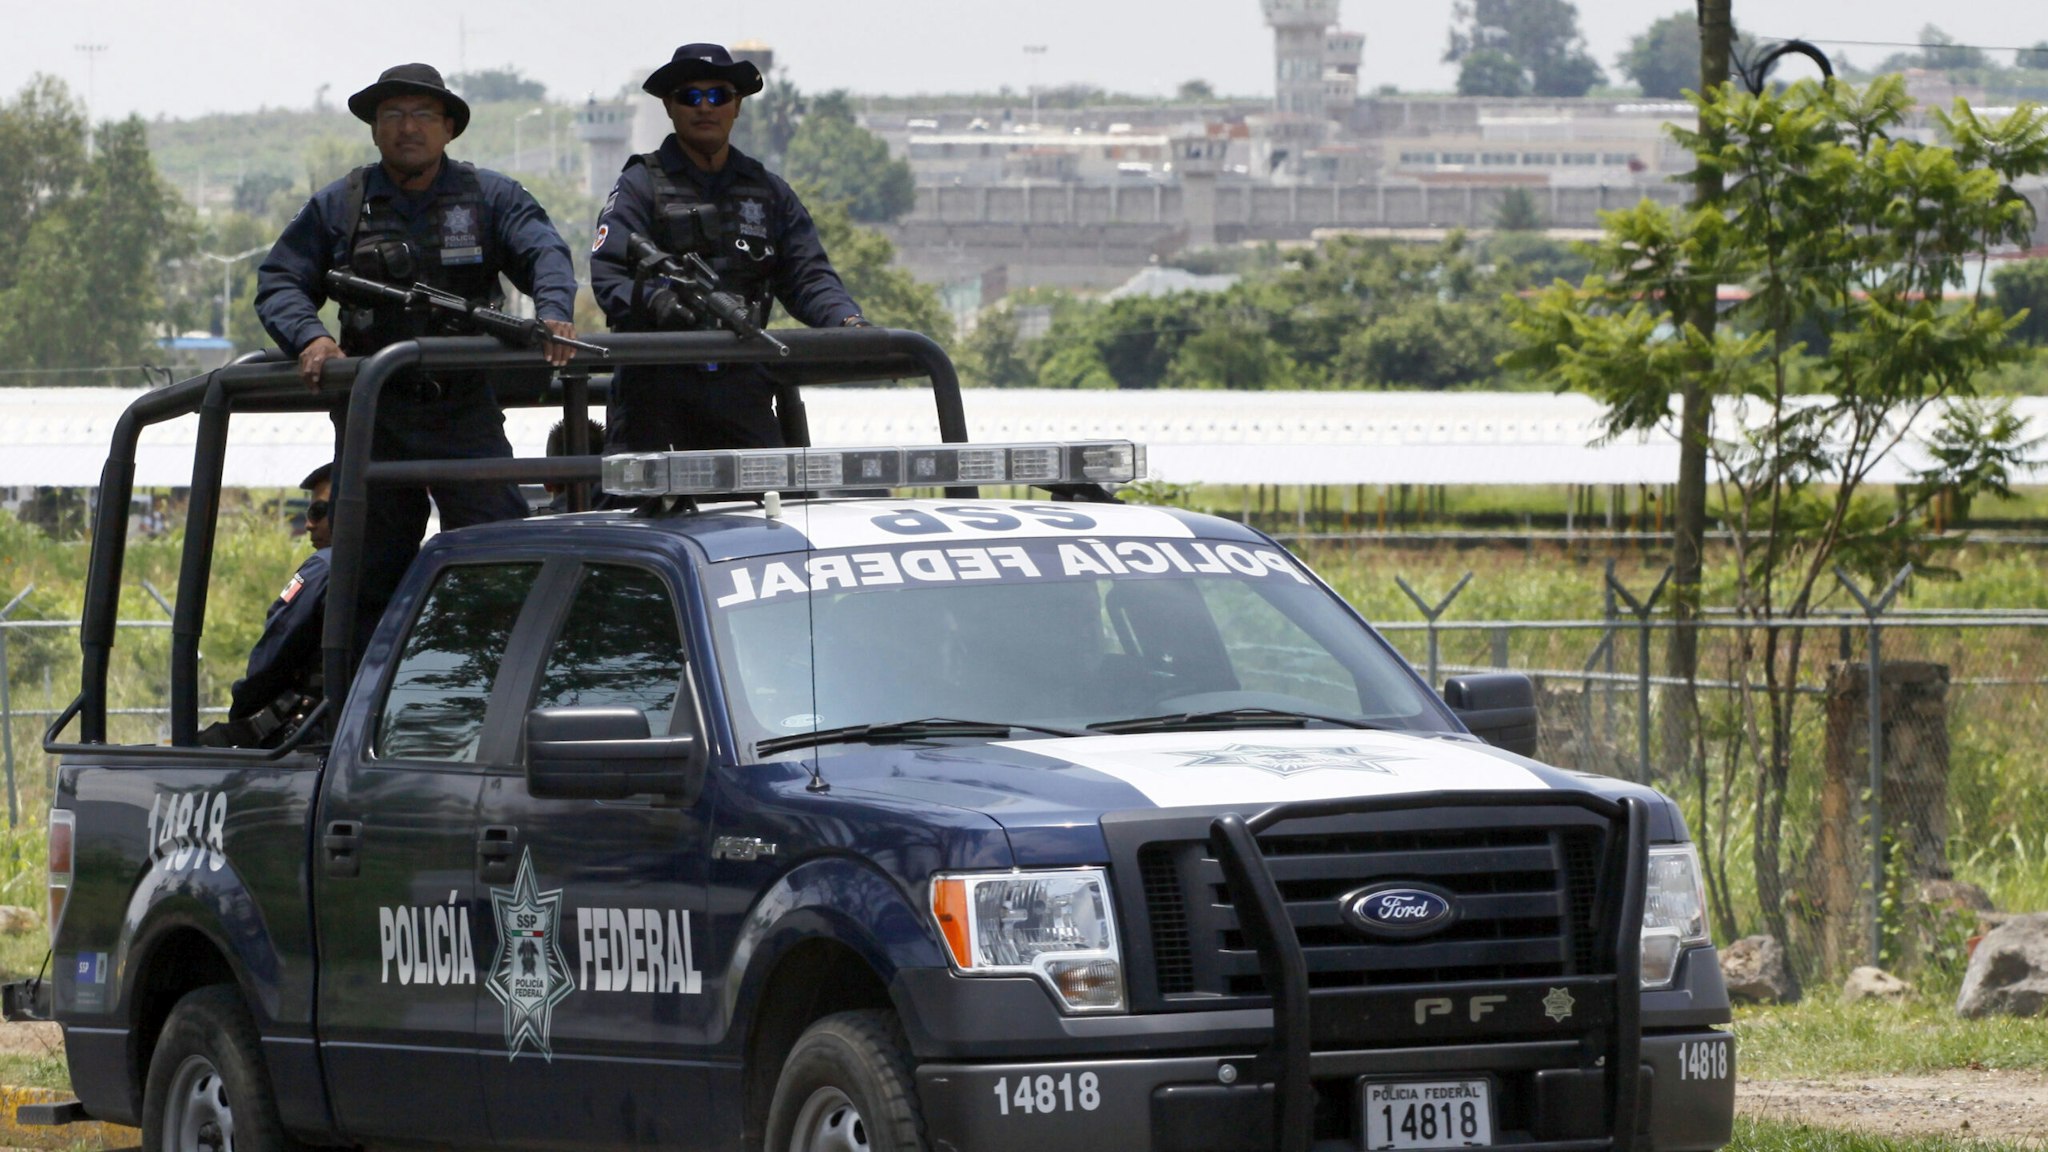 A unit of the Mexican Federal Police patrols the surroundings of the Puente Grande State prison (background) in Zapotlanejo, Jalisco State, Mexico, on 9 August, 2013 where former top Mexican cartel boss Rafael Caro Quintero -- who masterminded the kidnap and murder of a US anti-drug agent in 1985 -- was informed early Friday that a court ordered his release. A criminal court in the western state of Jalisco approved Rafael Caro Quintero's release on August 7, a court official who asked not to be identified told AFP. Caro Quintero has served 28 years in prison for the 1985 murder of US Drug Enforcement Administration special agent Enrique Camarena, who was kidnapped in Guadalajara and tortured and murdered.